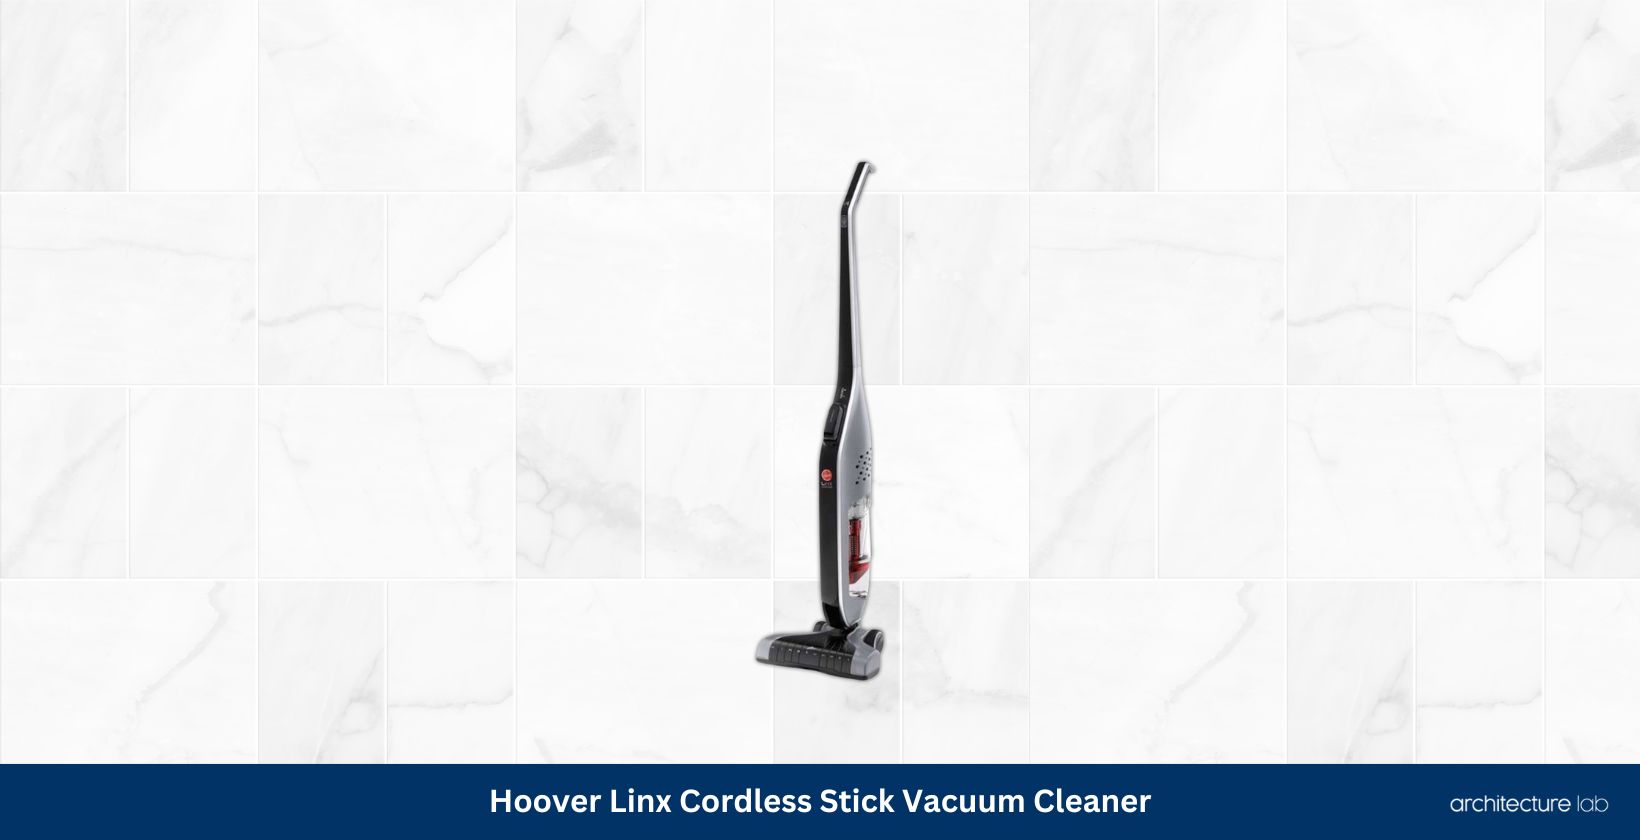 Hoover linx cordless stick vacuum cleaner bh50010